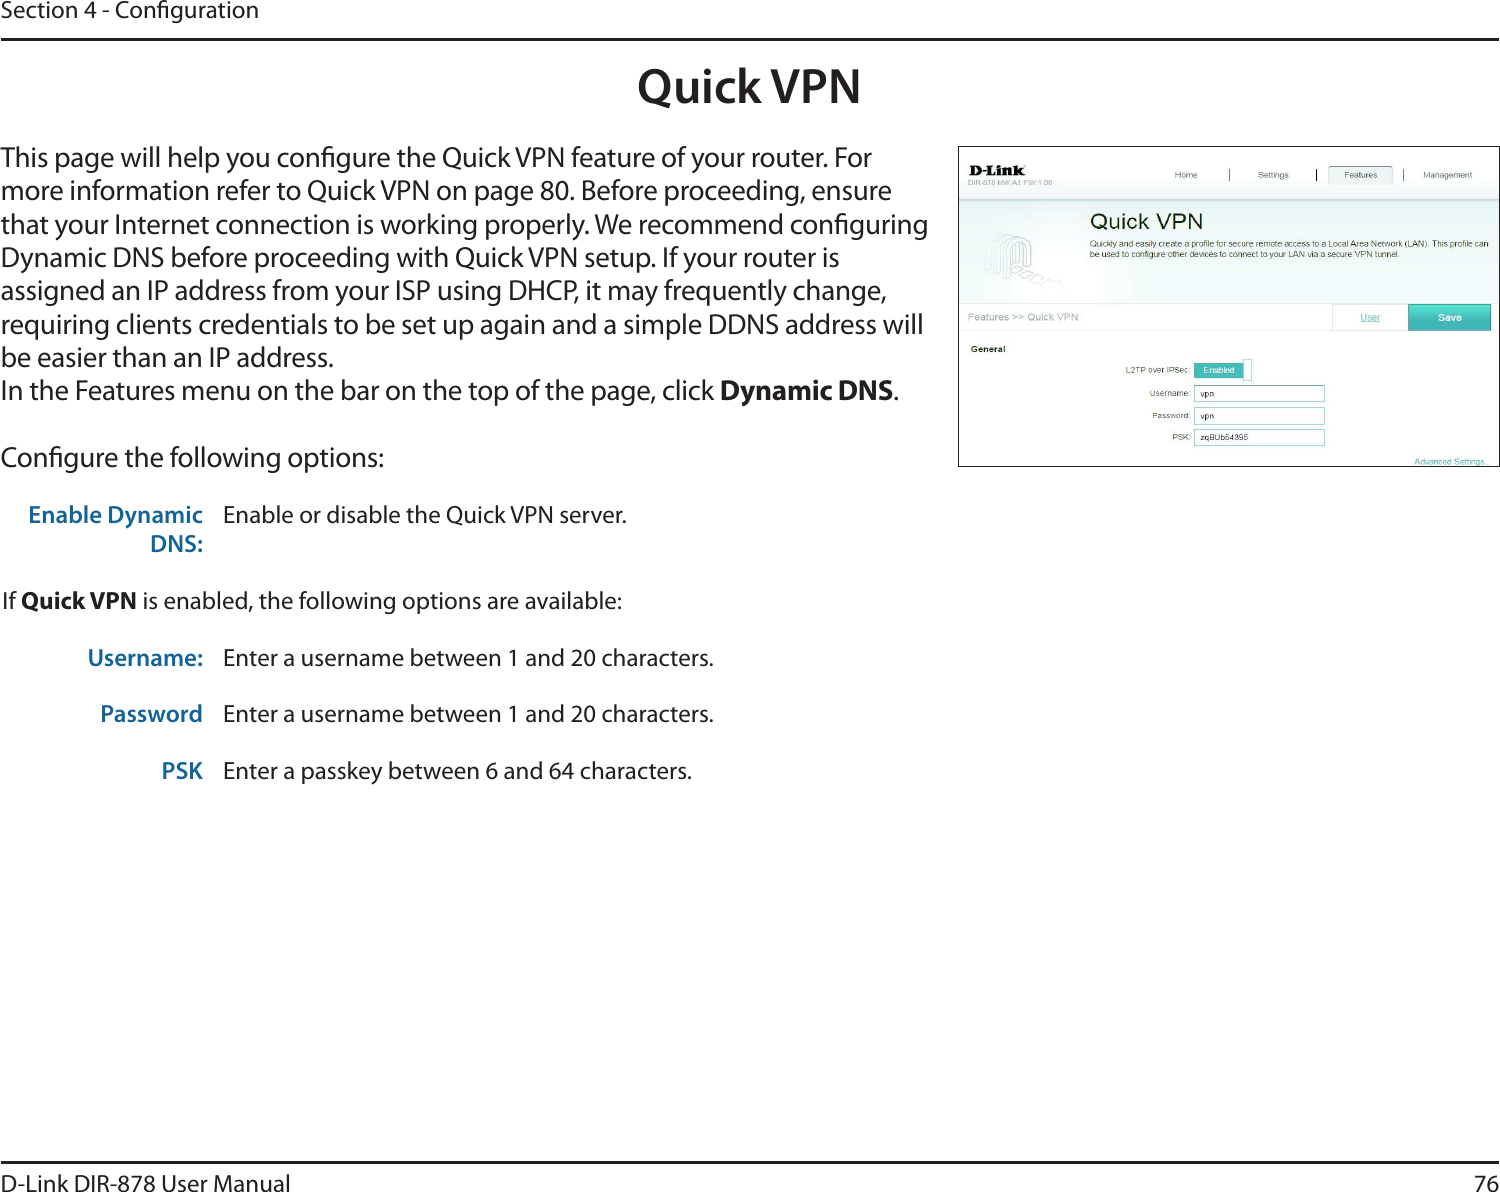 76D-Link DIR-878 User ManualSection 4 - CongurationQuick VPNThis page will help you congure the Quick VPN feature of your router. For more information refer to Quick VPN on page 80. Before proceeding, ensure that your Internet connection is working properly. We recommend conguring Dynamic DNS before proceeding with Quick VPN setup. If your router is assigned an IP address from your ISP using DHCP, it may frequently change, requiring clients credentials to be set up again and a simple DDNS address will be easier than an IP address.In the Features menu on the bar on the top of the page, click Dynamic DNS.Congure the following options:Enable Dynamic DNS:Enable or disable the Quick VPN server.If Quick VPN is enabled, the following options are available:Username: Enter a username between 1 and 20 characters.Password Enter a username between 1 and 20 characters.PSK Enter a passkey between 6 and 64 characters.